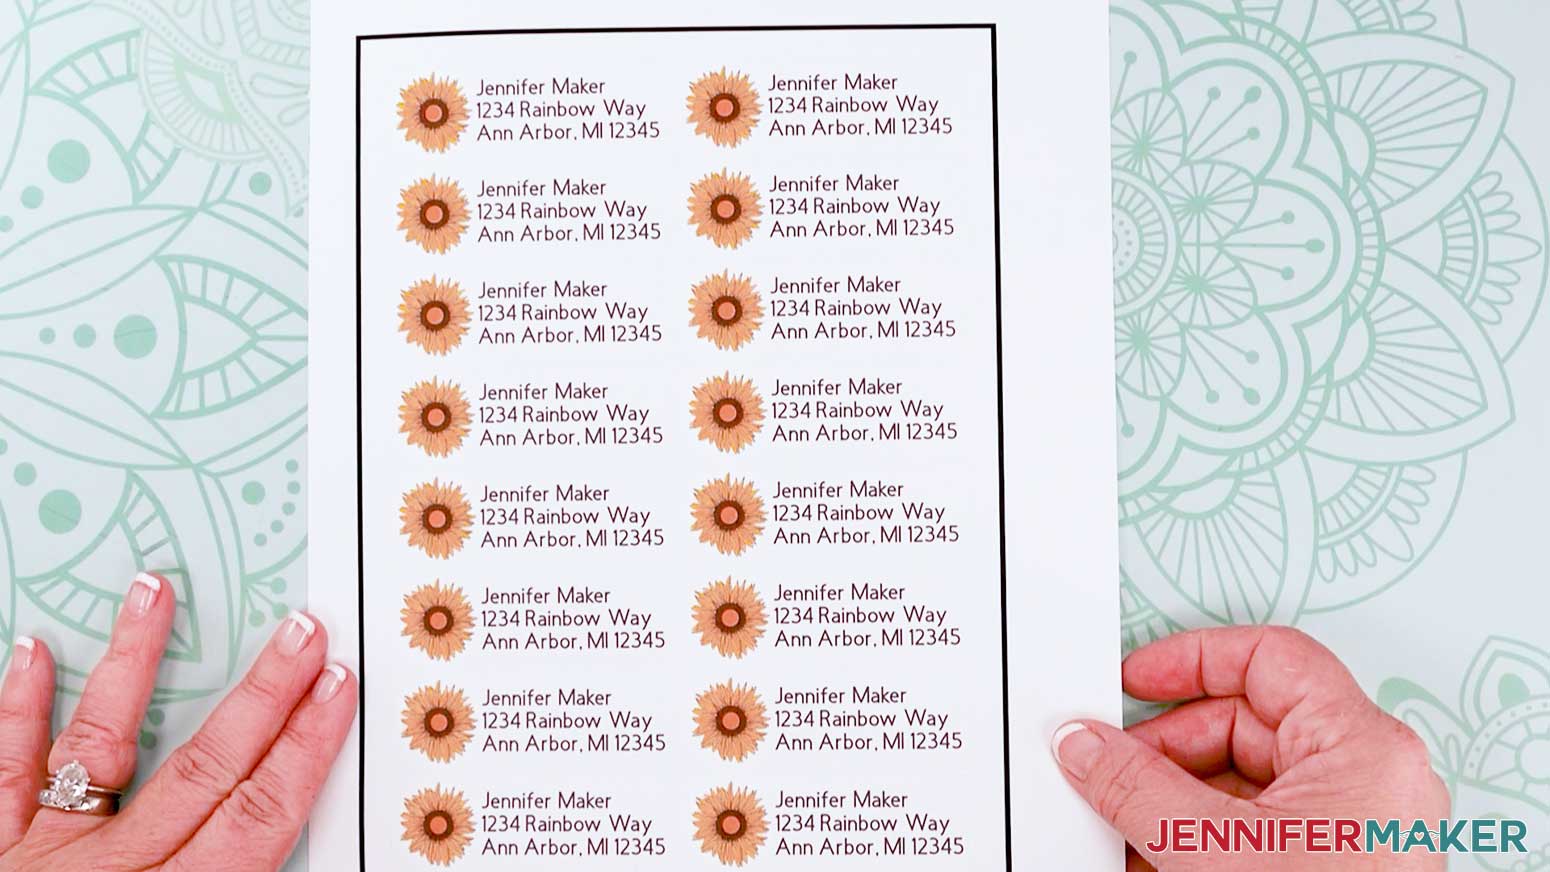 full sheet of personalized address labels